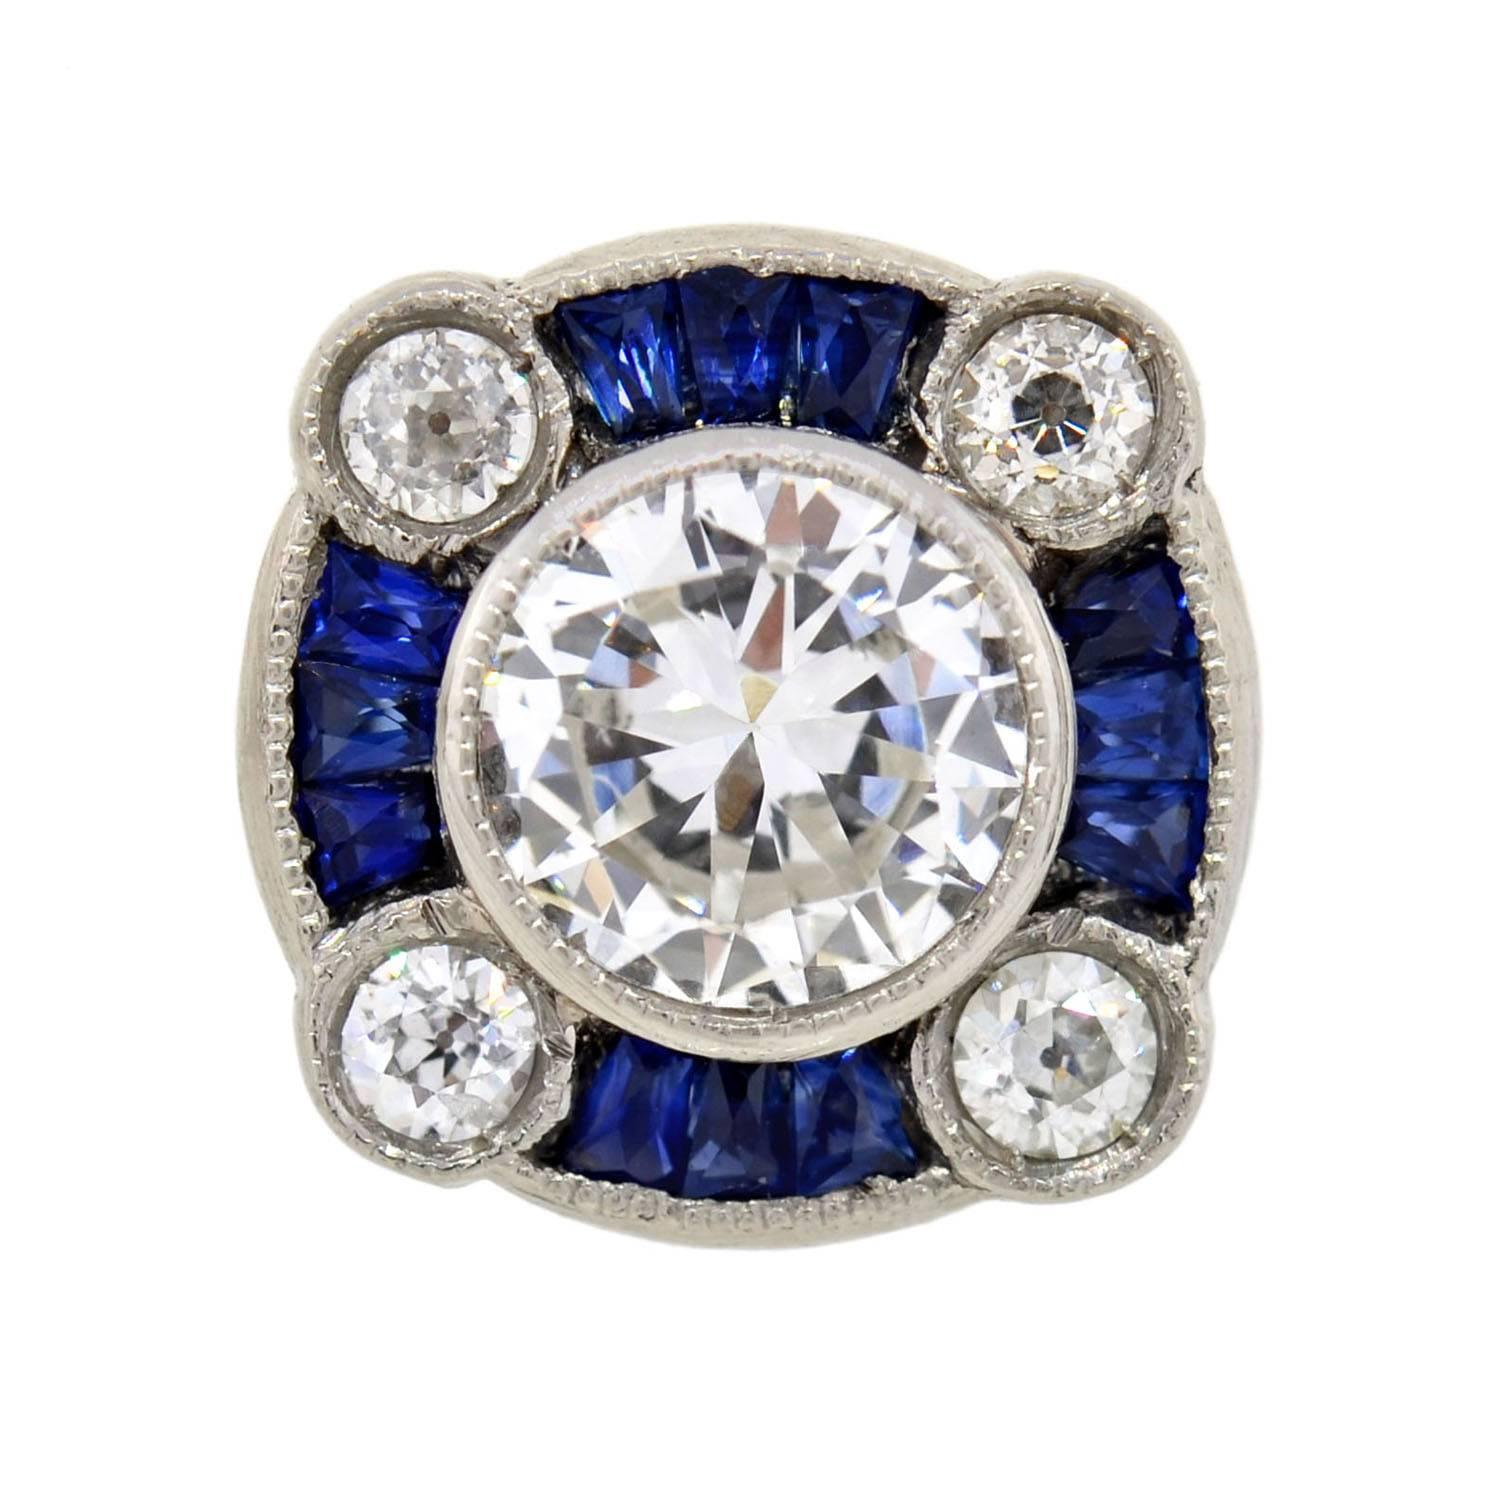 A stunning pair of diamond and sapphire studs inspired by the Art Deco era! Each platinum earring holds a sparkling Brilliant Cut center diamond set within a milgrained bezel setting. The central diamonds have an approximate total weight of 1.20ct